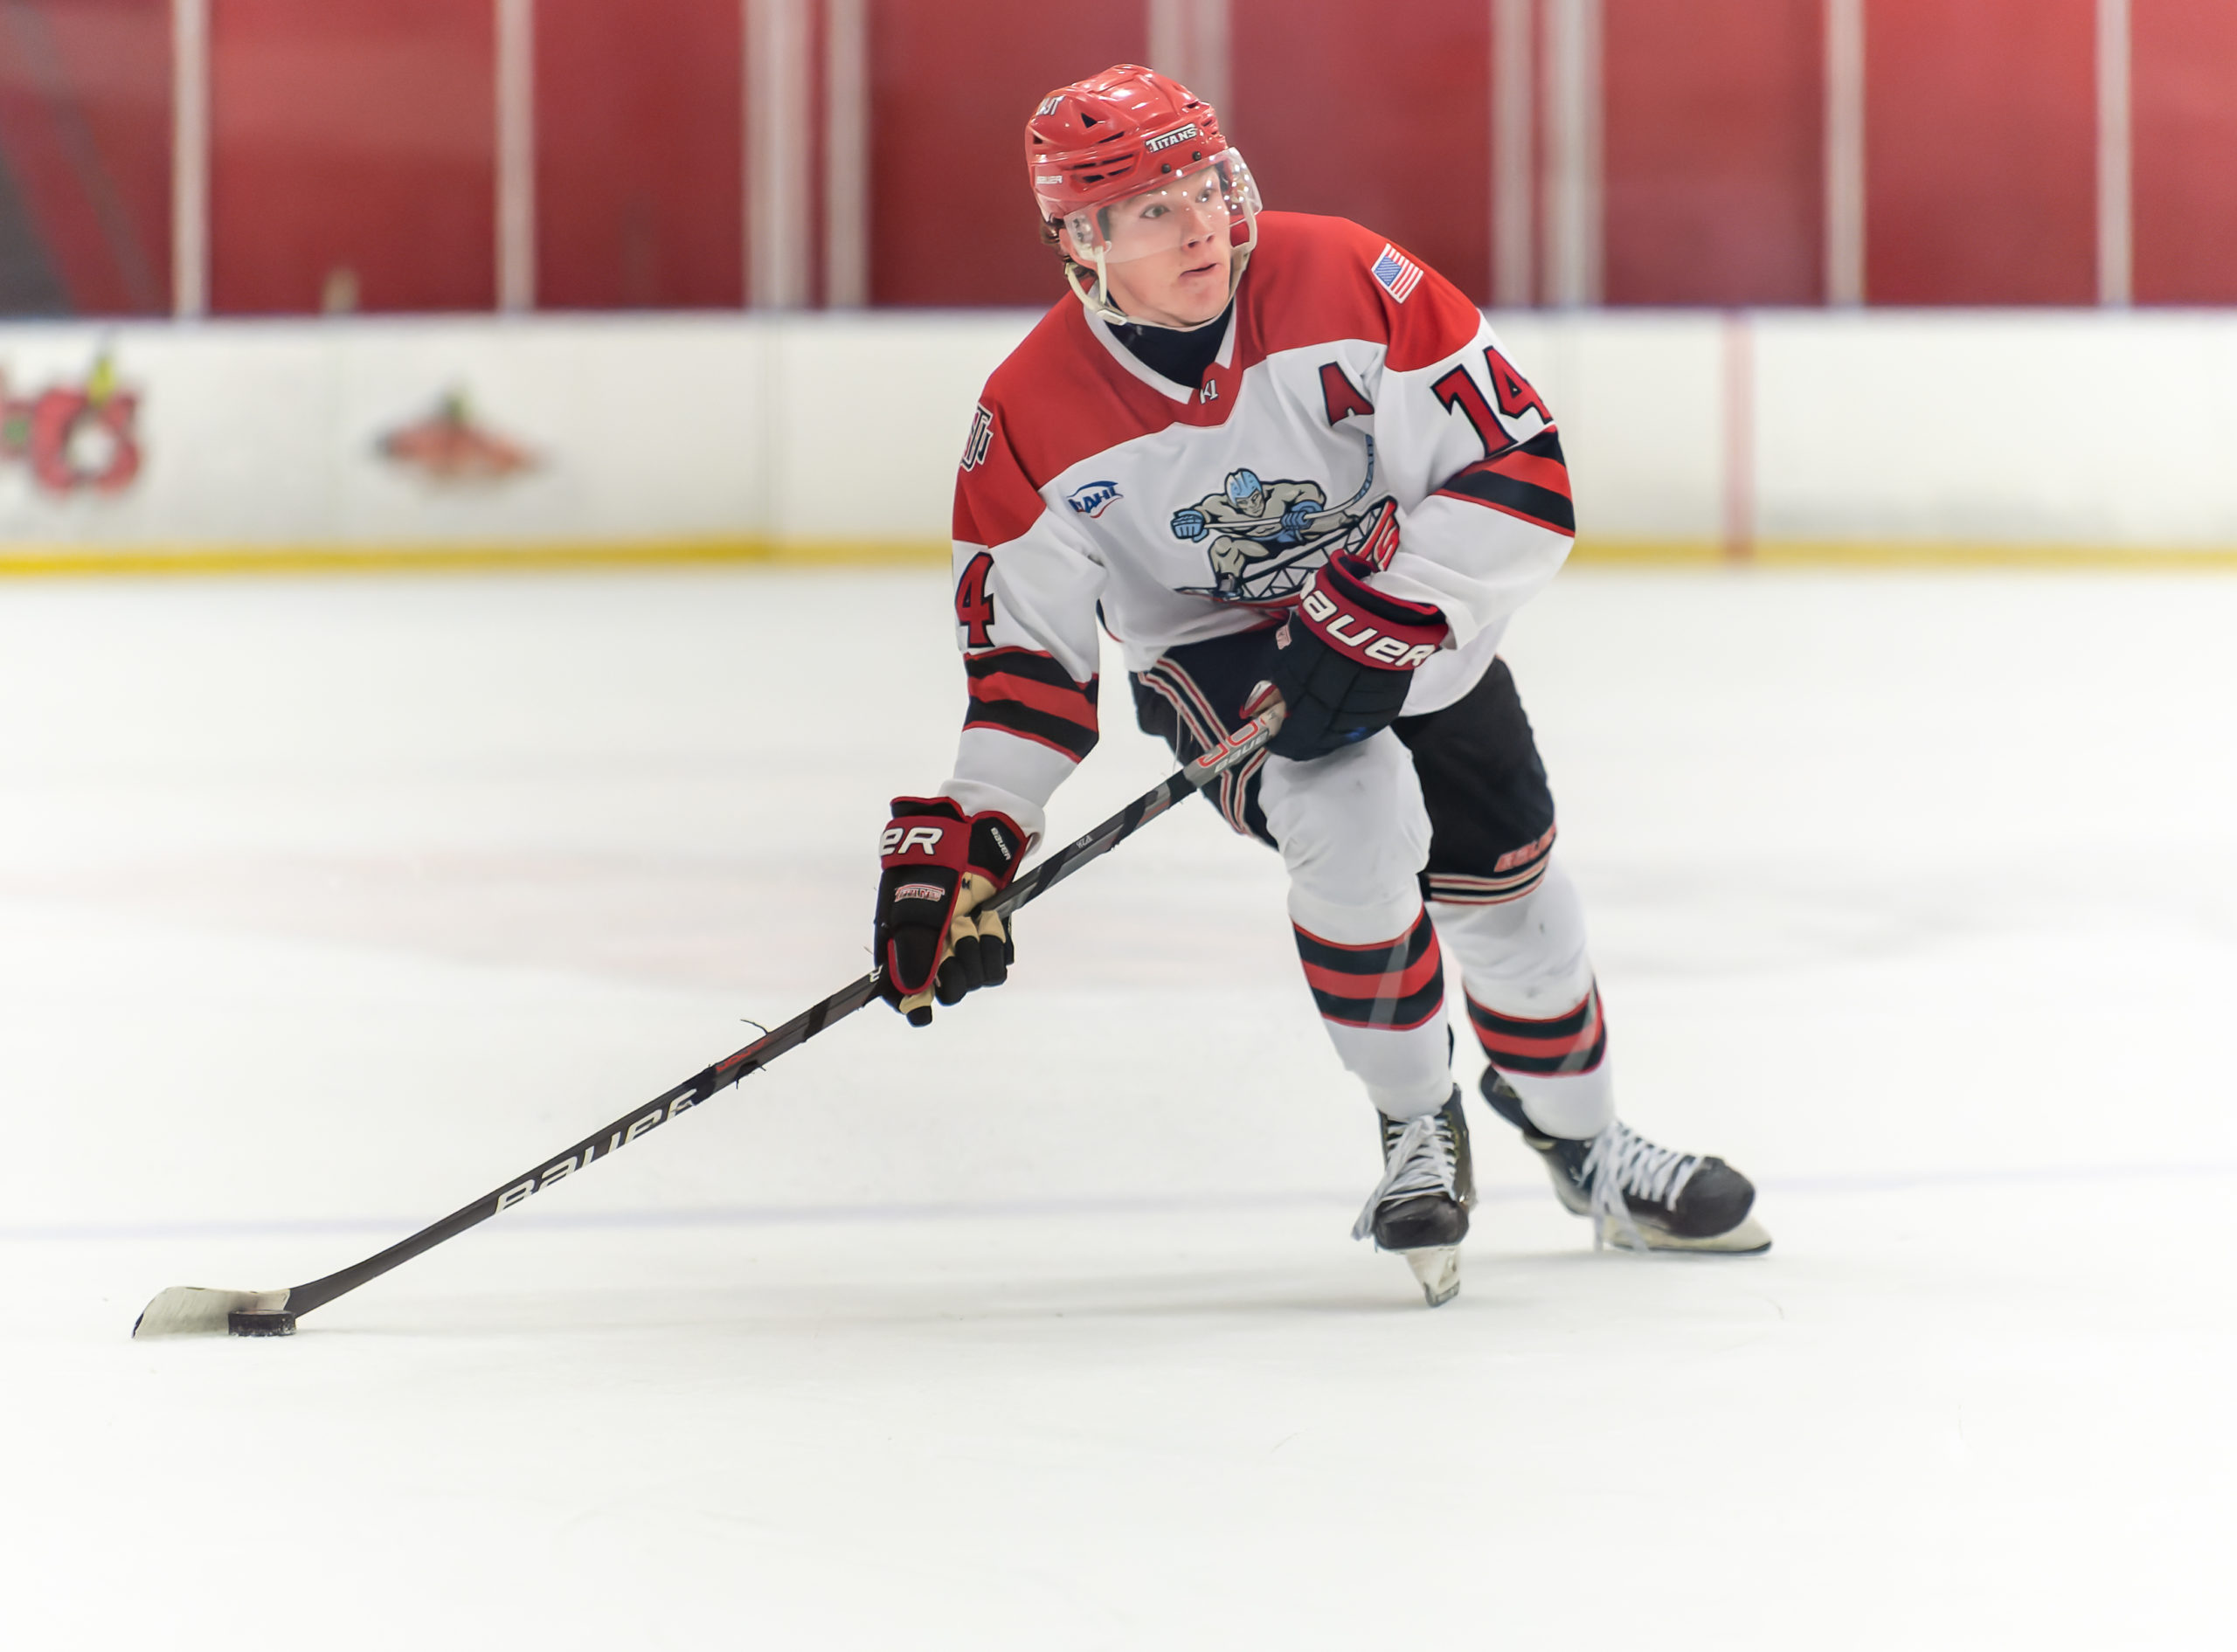 Dumas named honorable mention for NAHL’s Forward of the Month for October